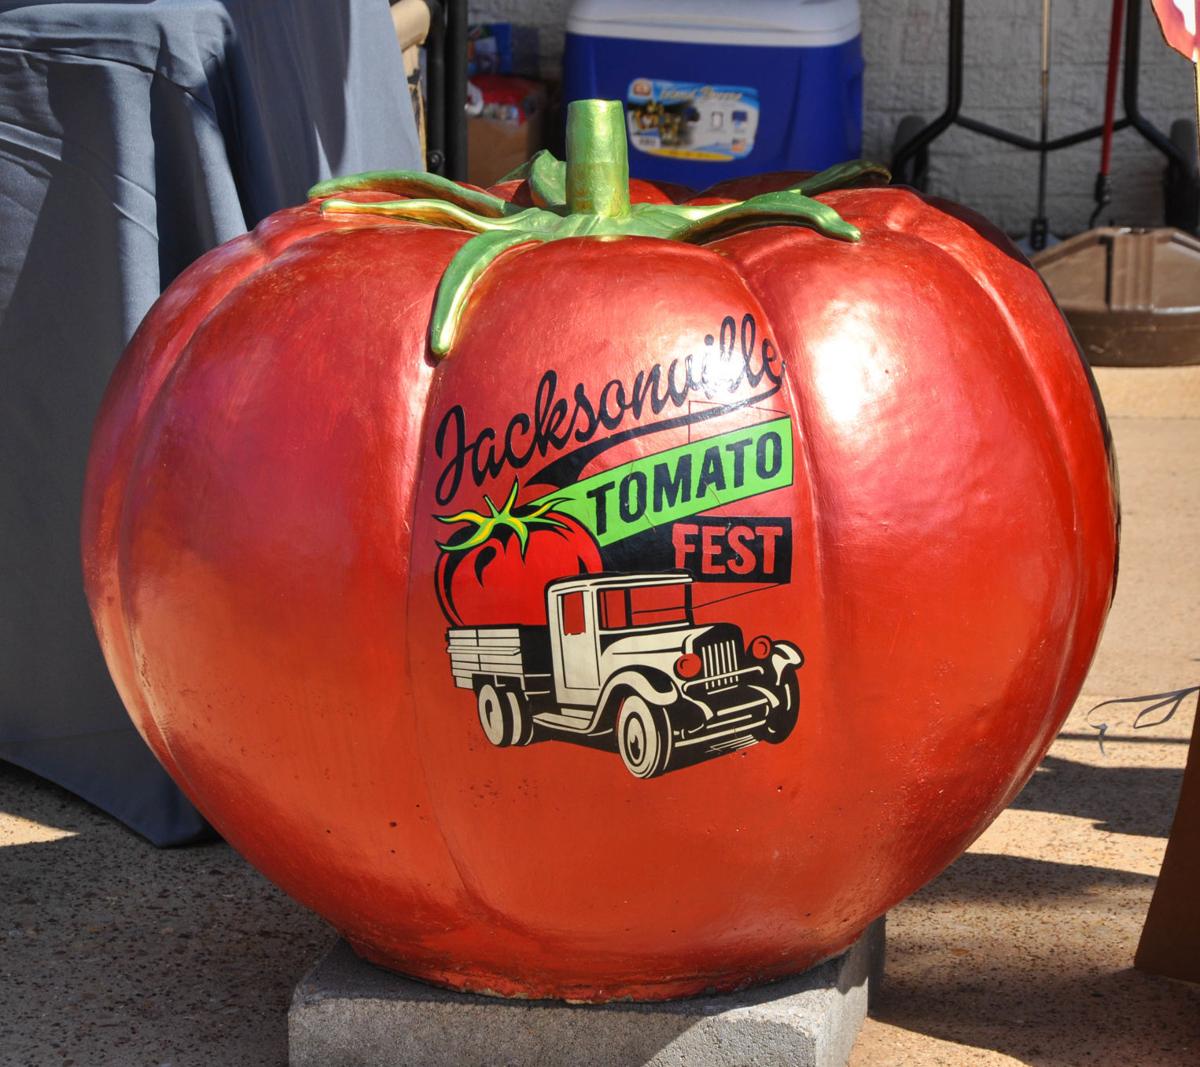 34th Annual Jacksonville Tomato Fest attracts thousands, celebrates